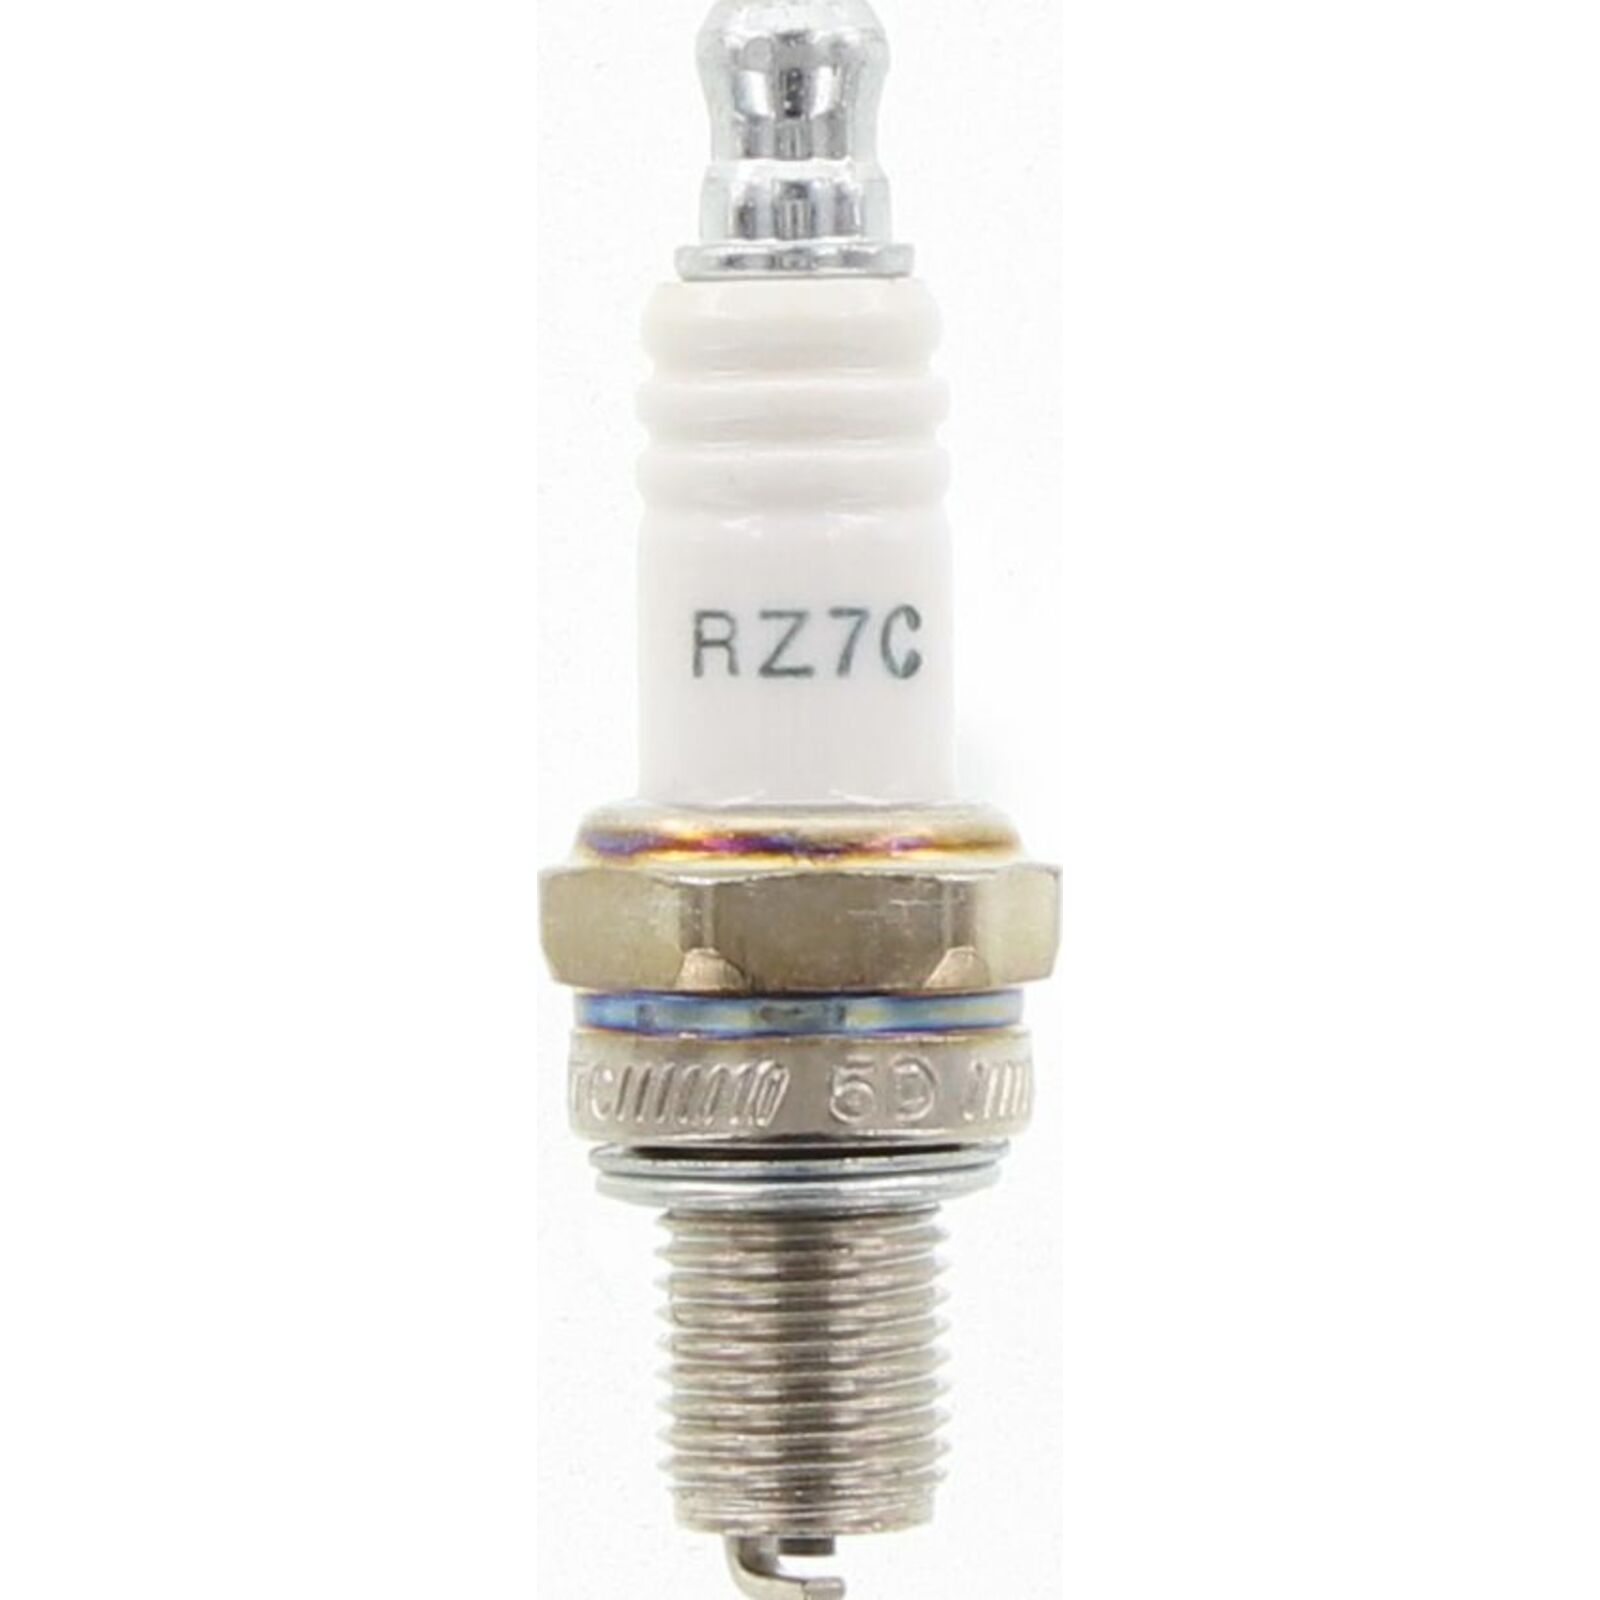 Bosch USR7AC and NGK CMR6H Oregon 77-355-1 Replacement Spark Plug for Champion RZ7C 